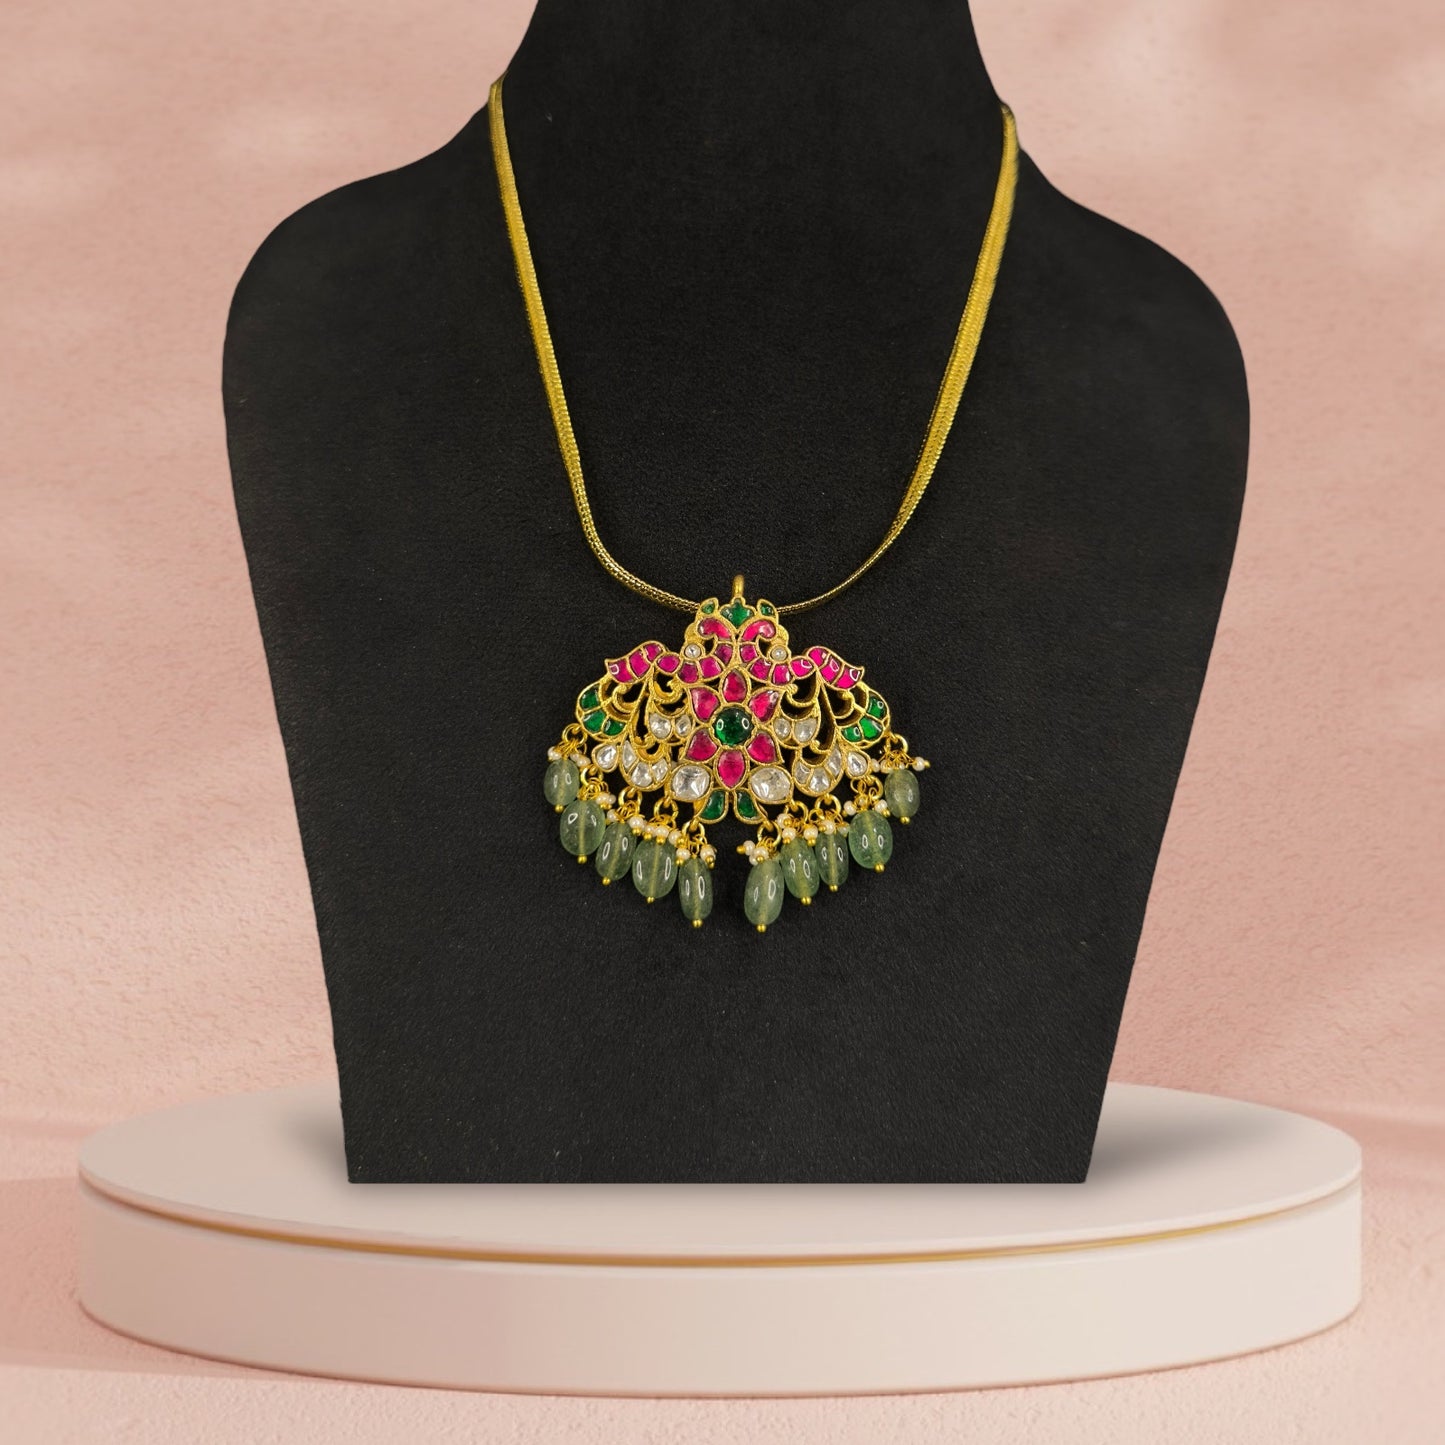 Opulent Jadau Kundan Chain Pendant Necklace with Green Bead Drops with 22k gold plating This Product Belongs to Jadau Kundan Jewellery Category